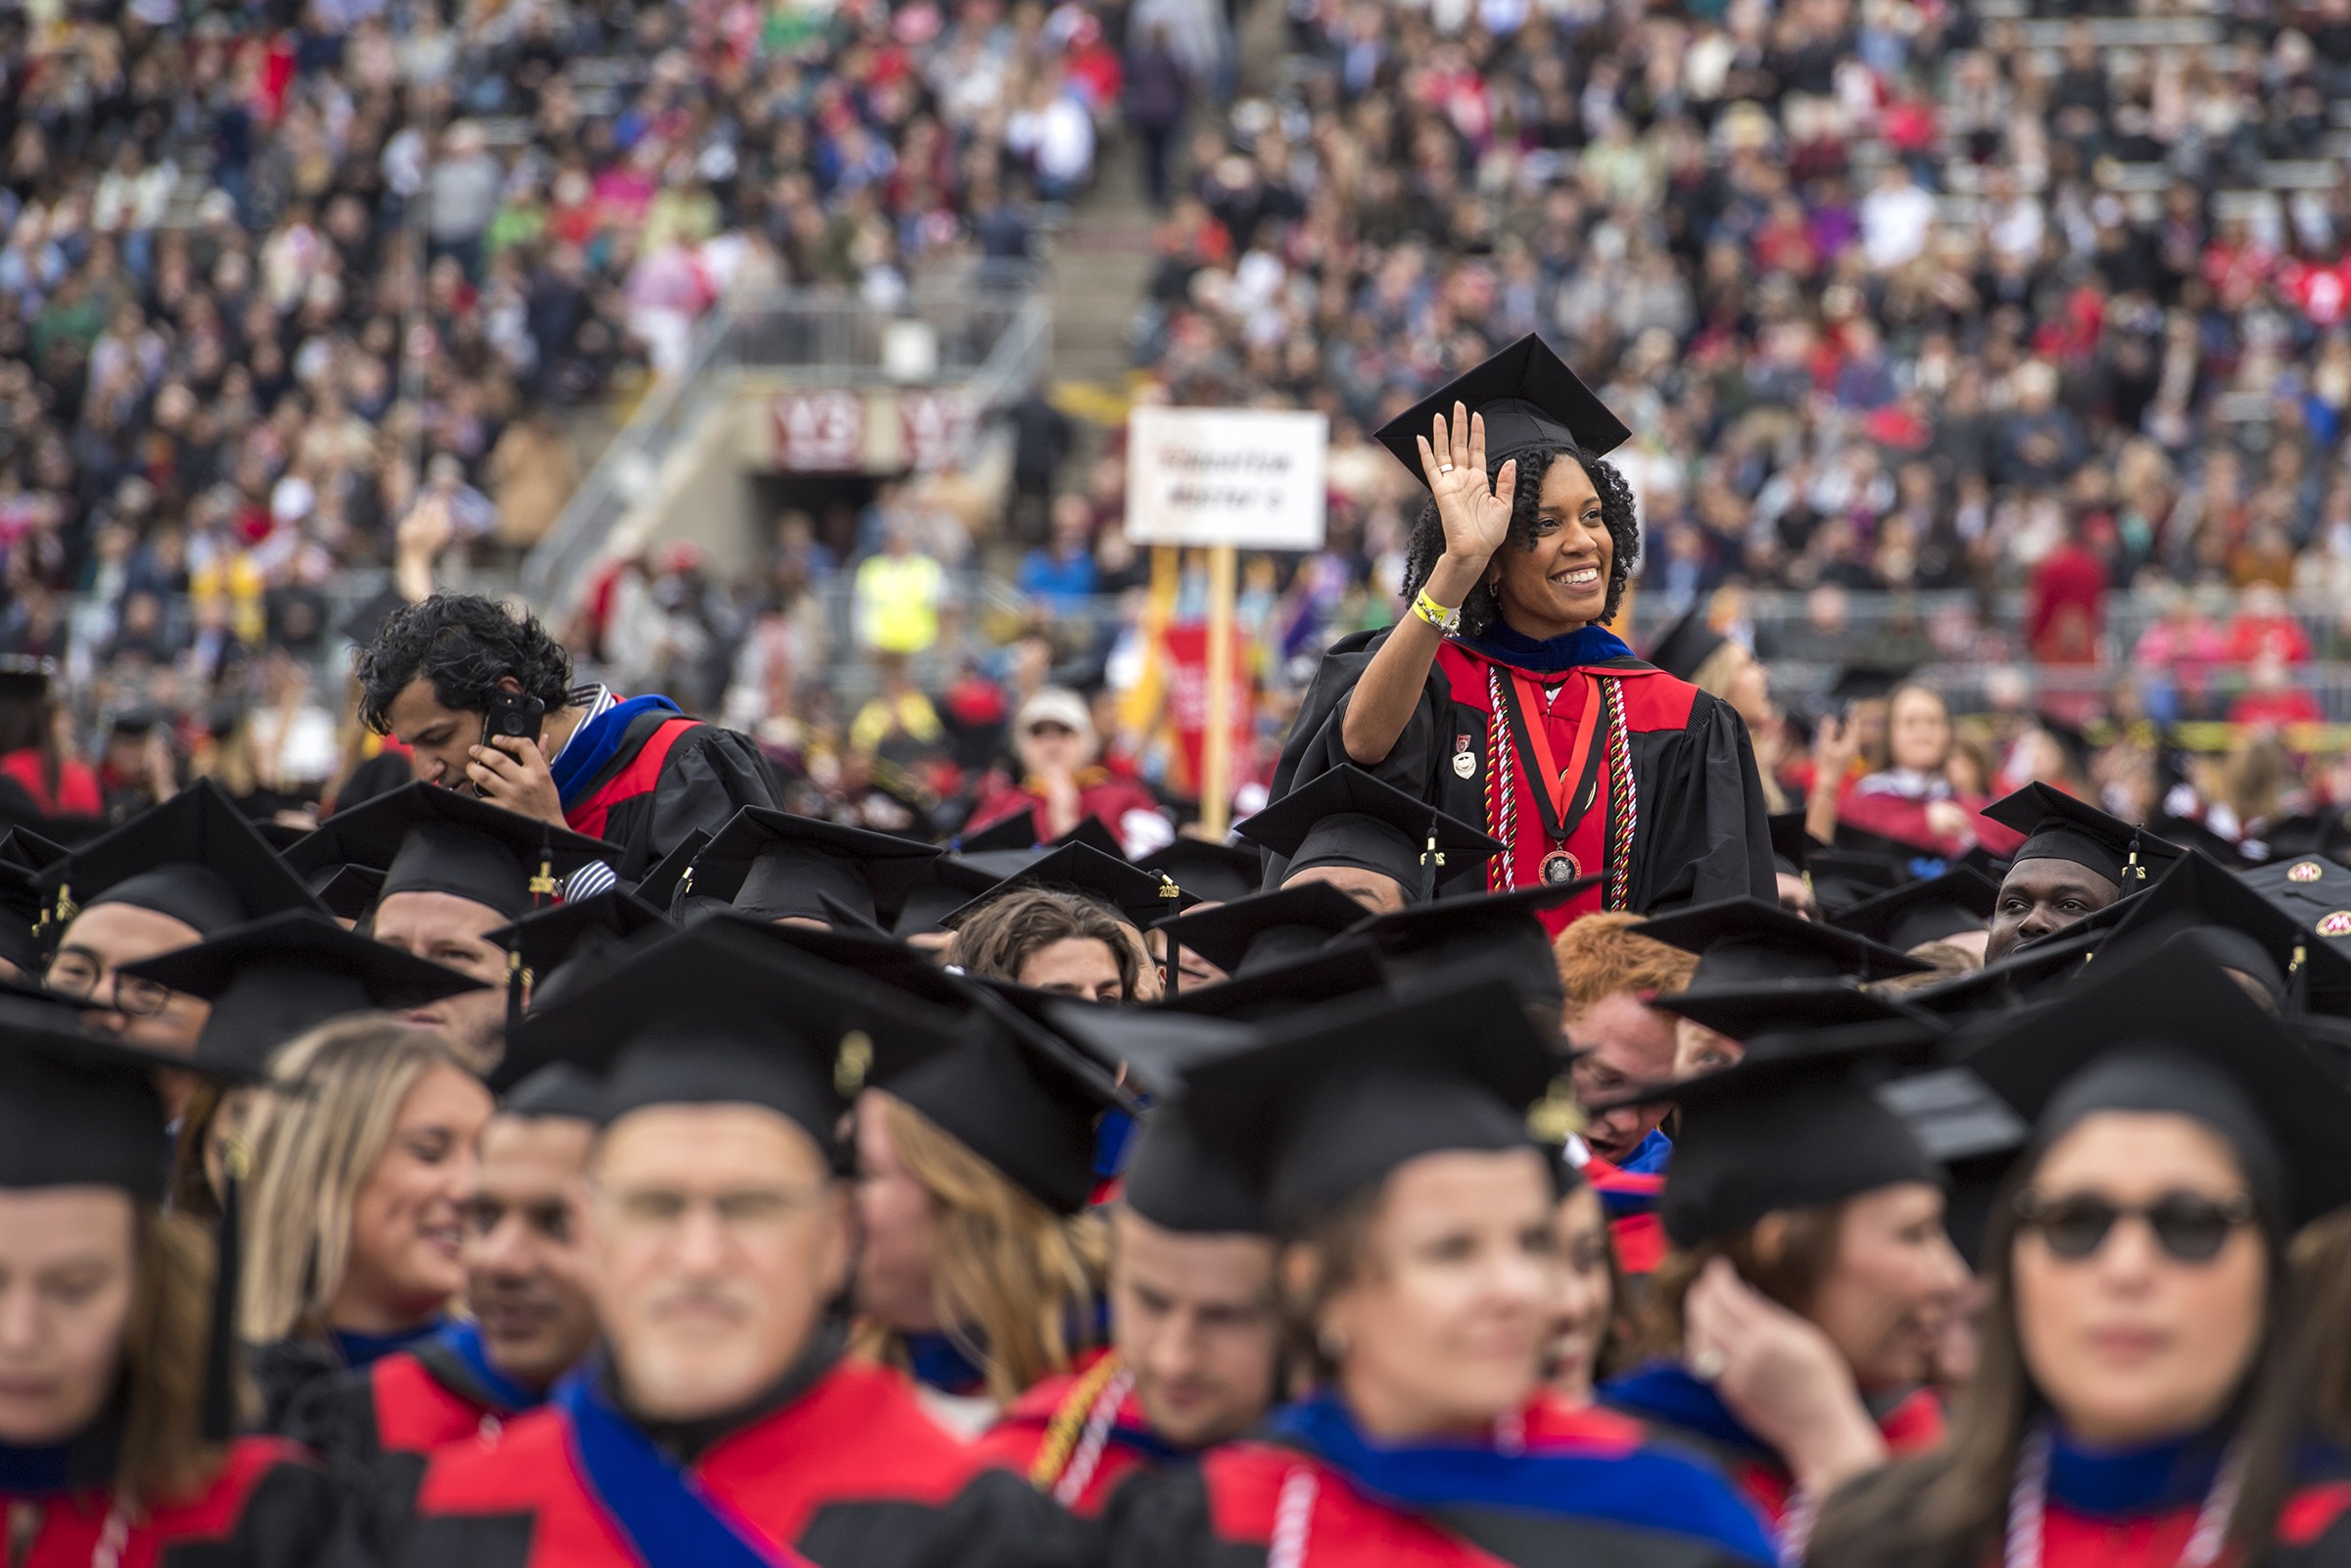 WSB graduates at Camp Randall during Commencement